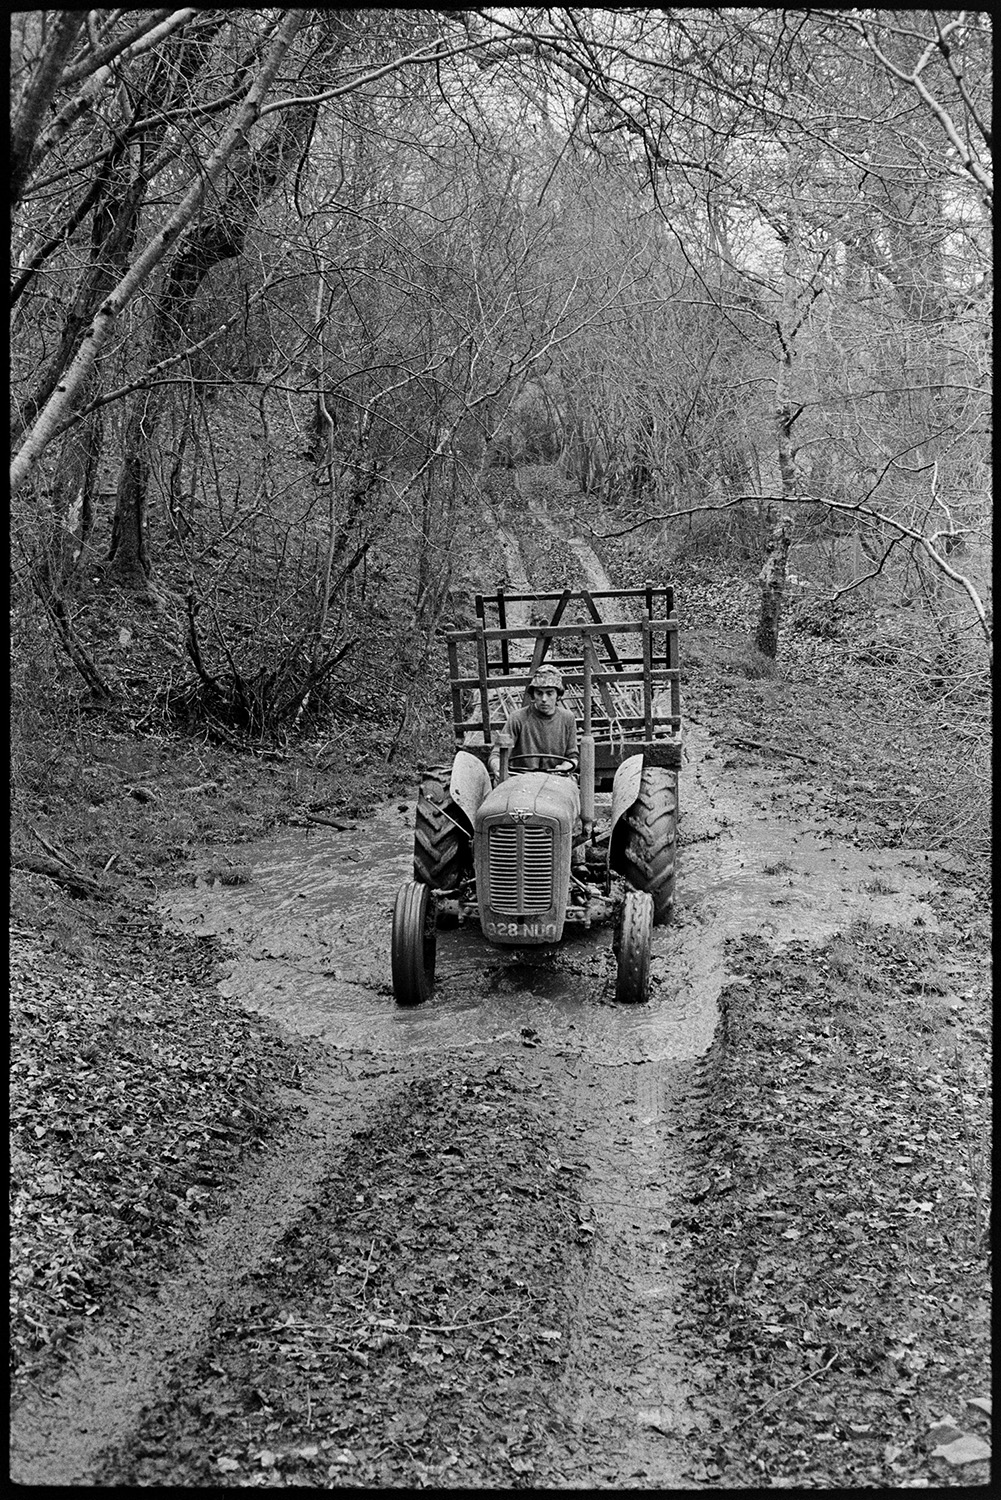 Sorting ewes and lambs in pen and feeding them. 
[Graham Ward driving a tractor and trailer along a muddy track at Parsonage Iddesleigh. Trees line the track.]